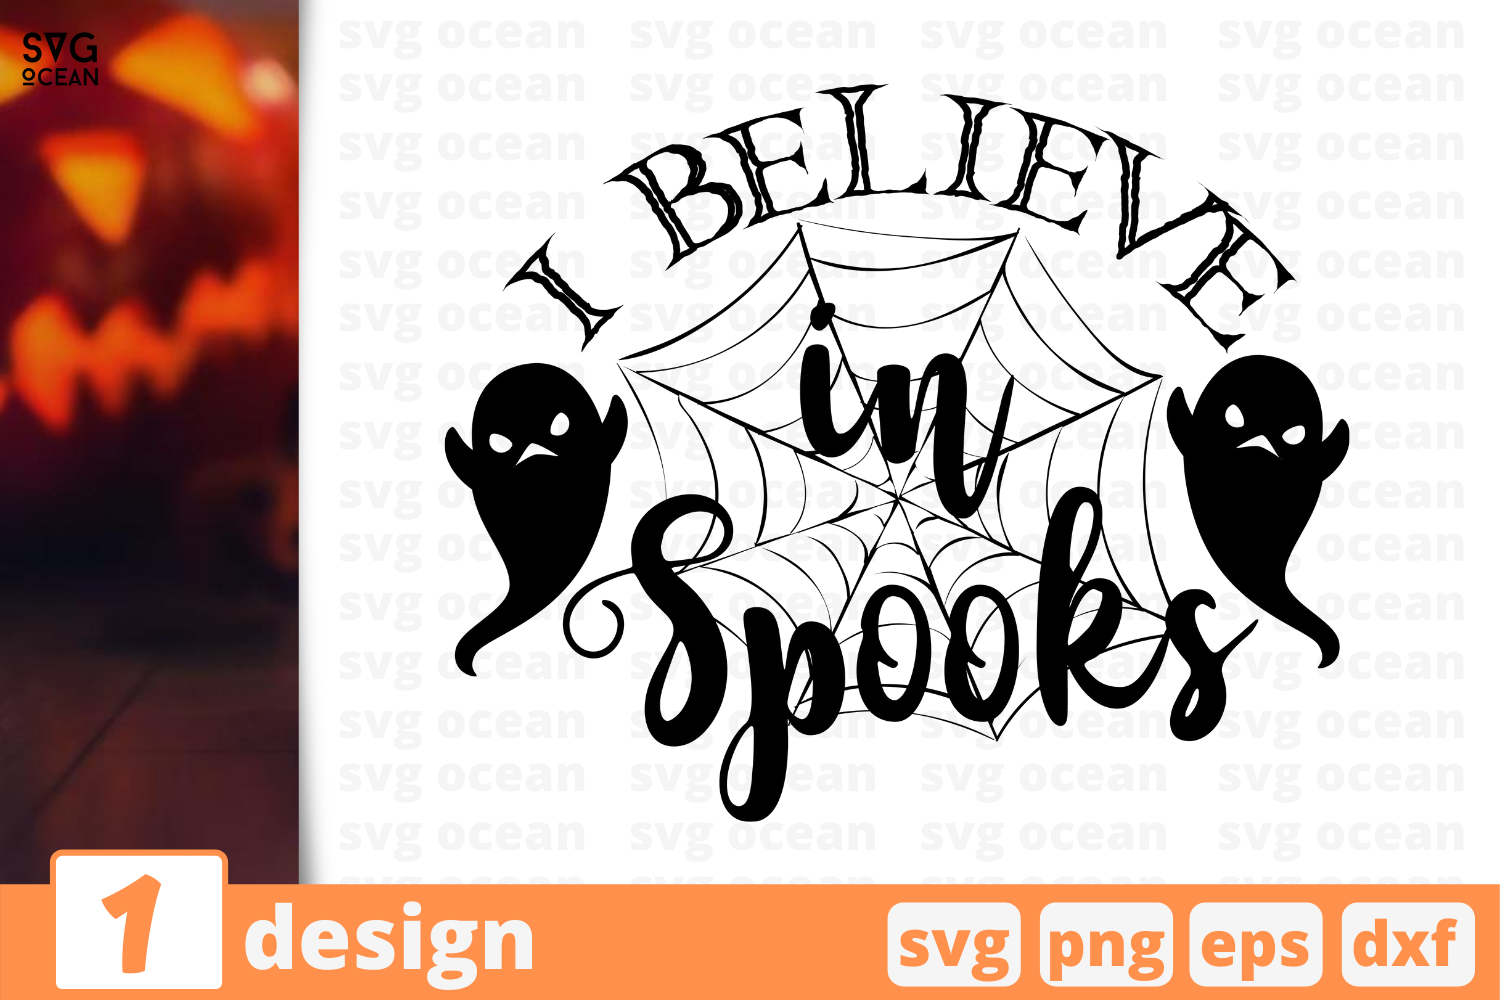 1 I Believe In Spooks Halloween Quotes Cricut Svg By Svgocean Thehungryjpeg Com